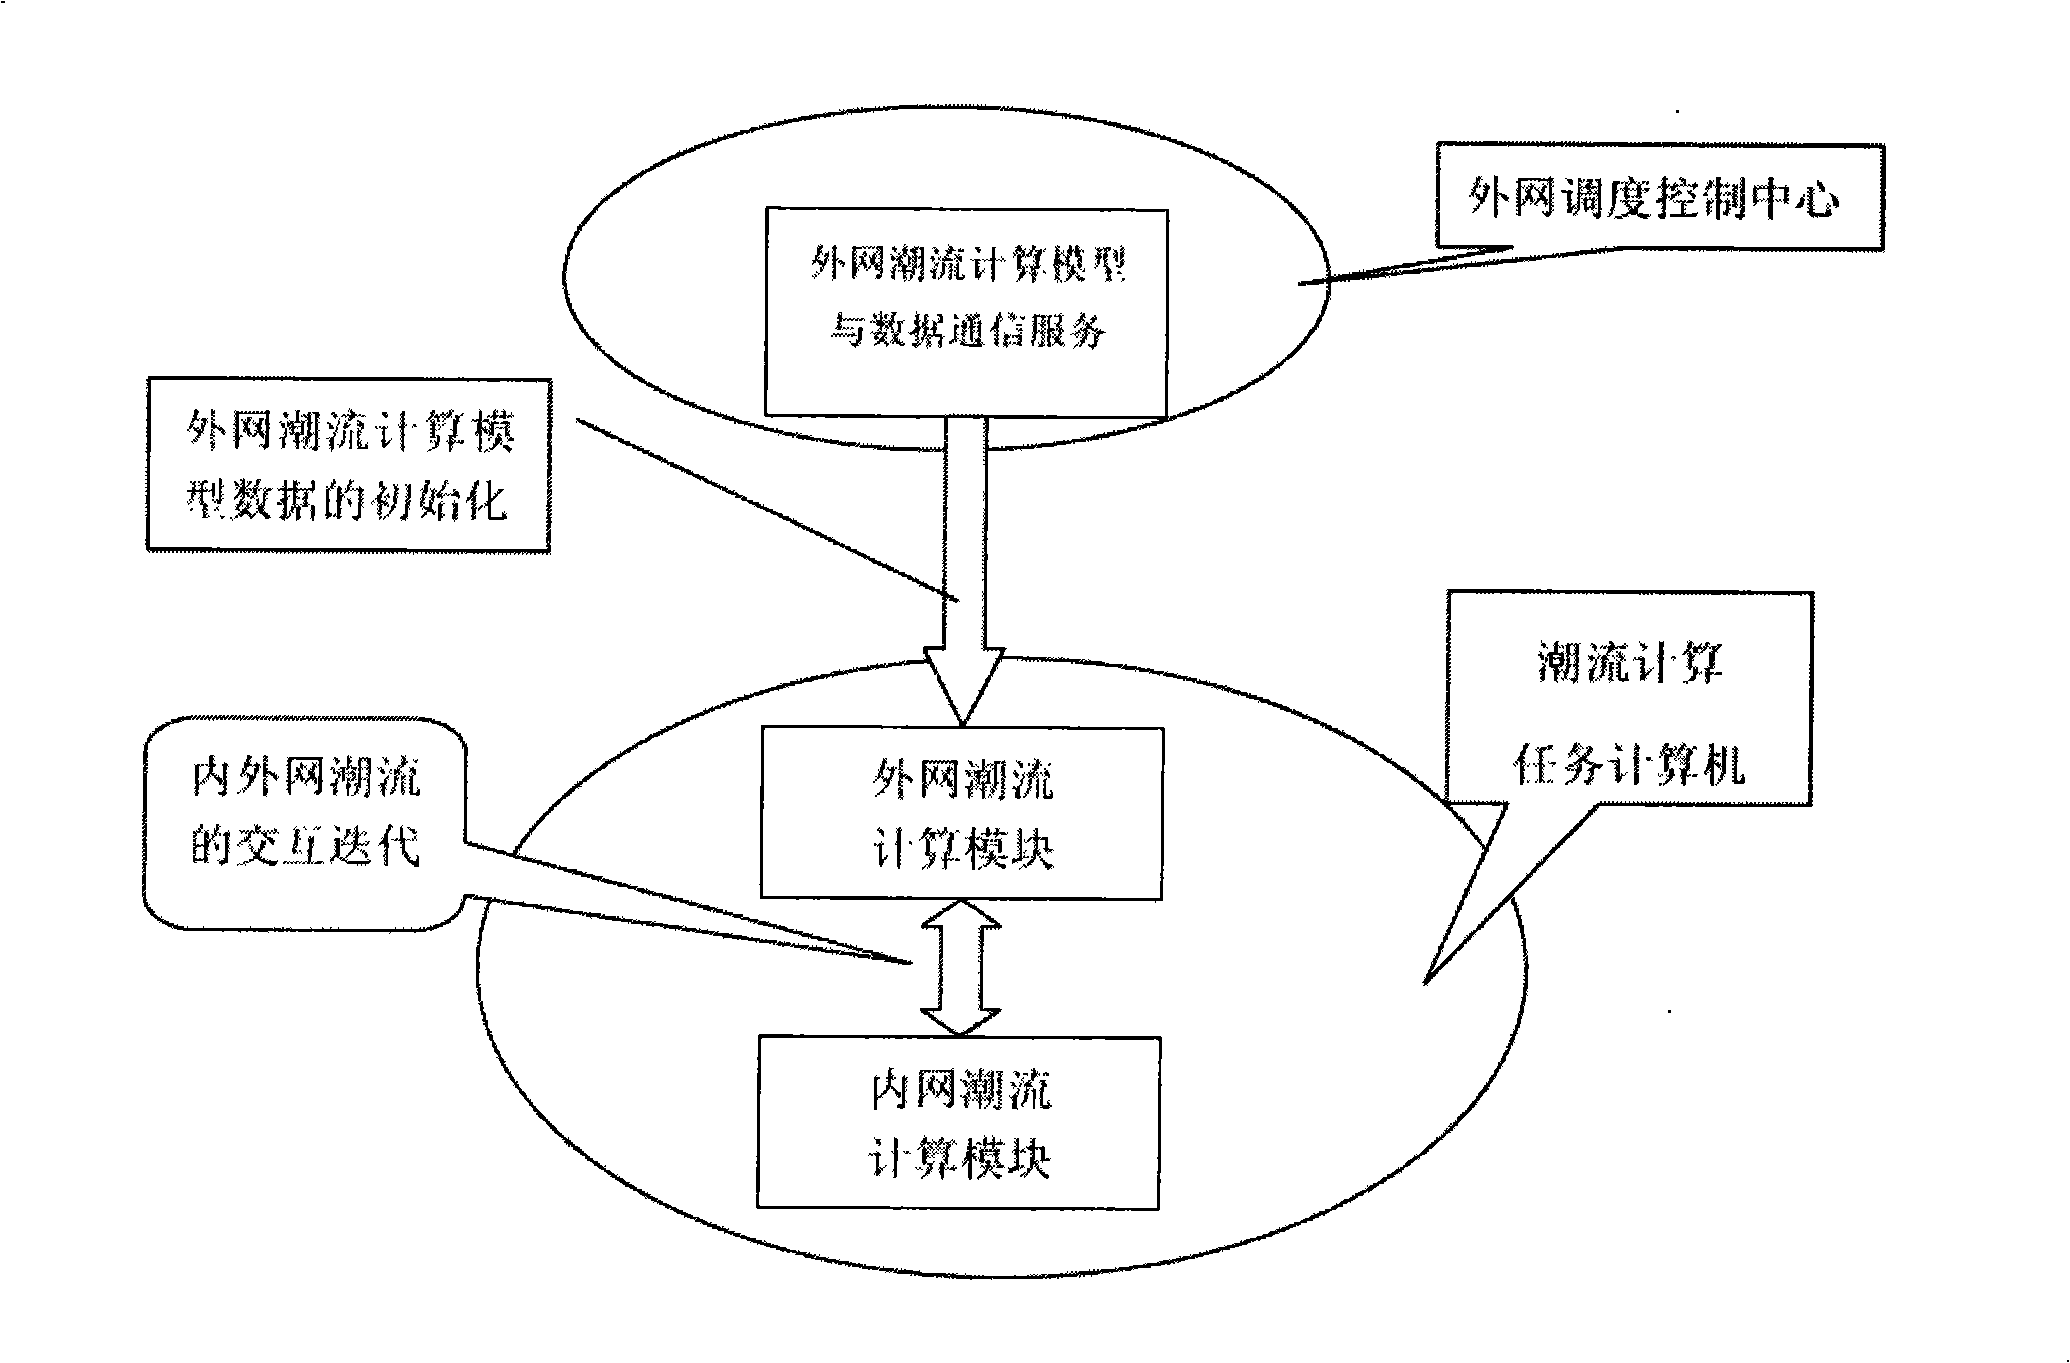 Interconnected electric network distributed current calculating method on the basis of alternation and iteration of current module